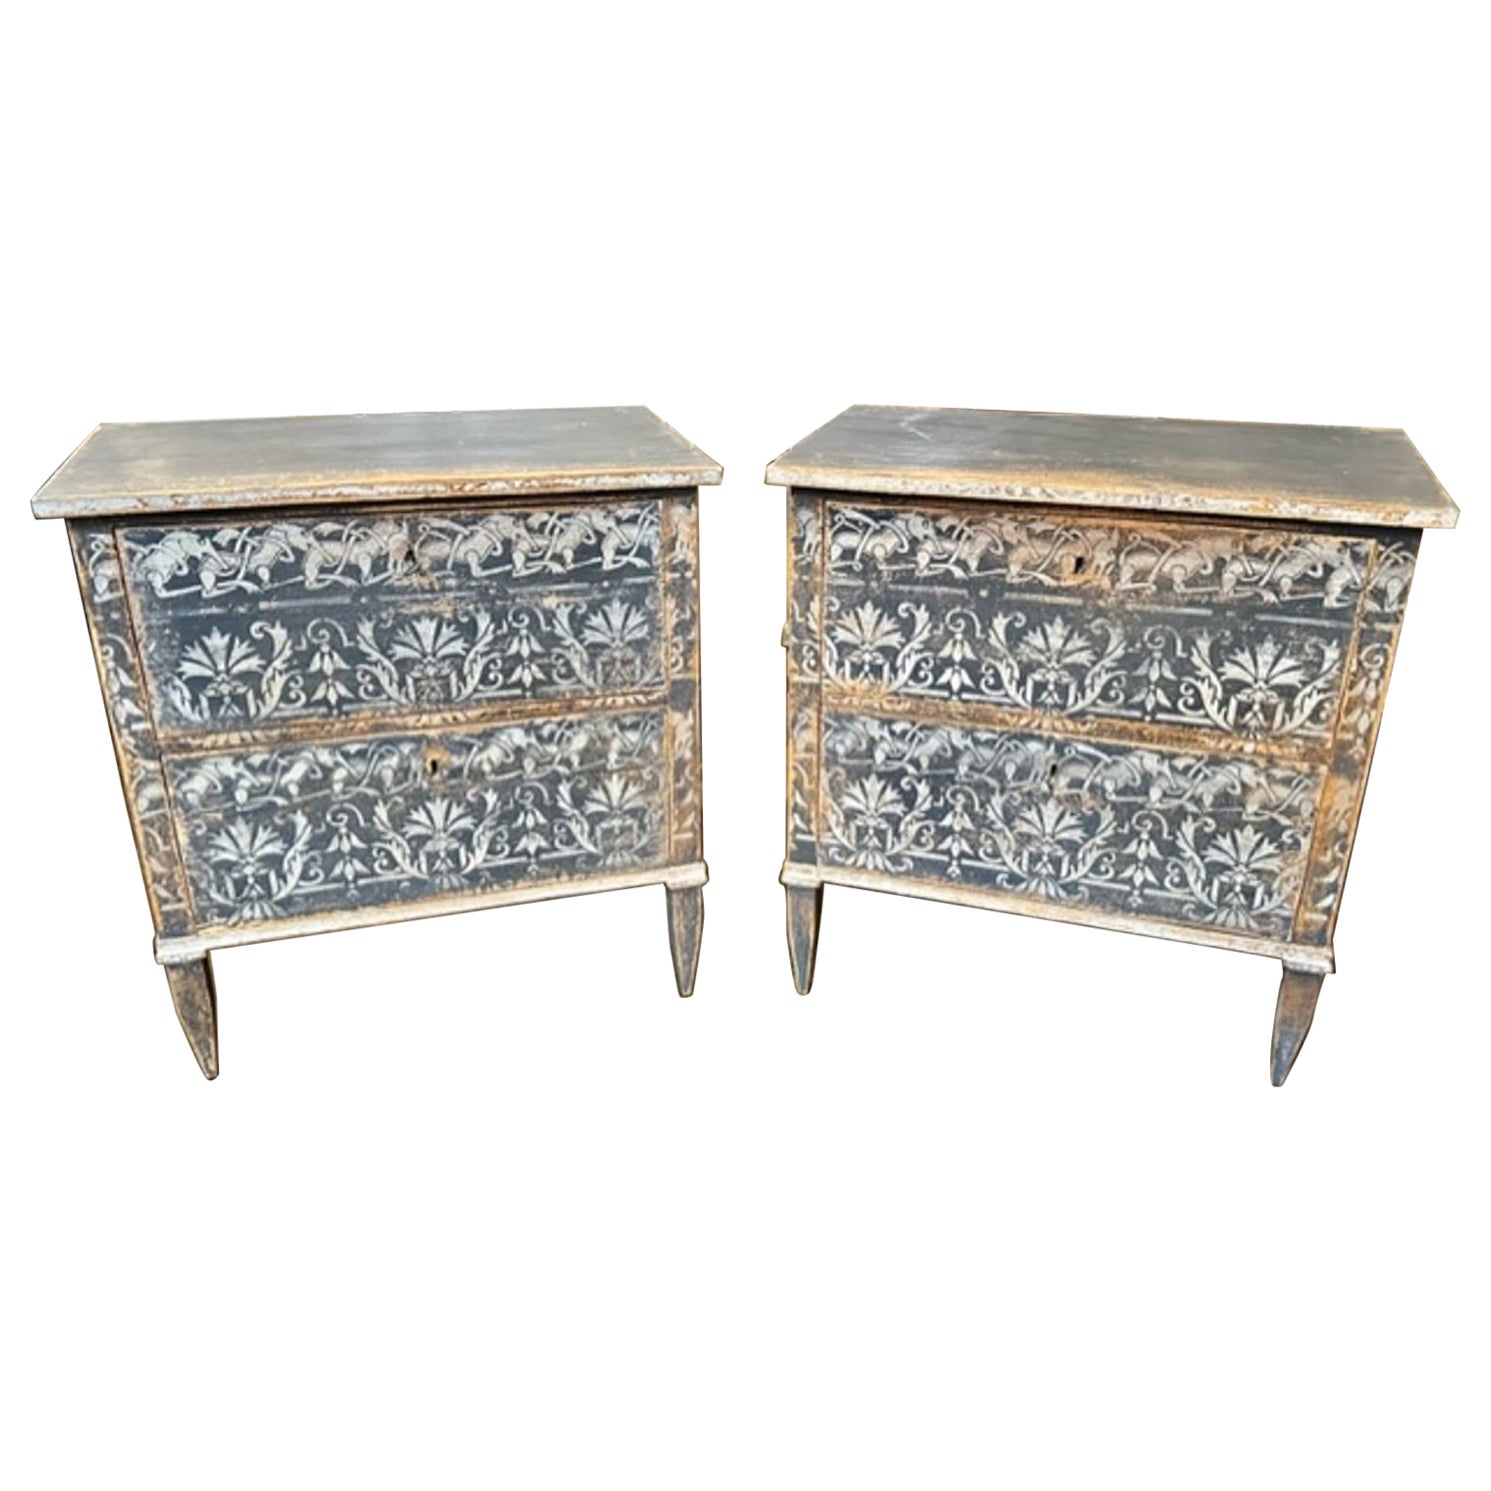 Pair of German Neo-Classical Hand Painted Bed Side Chests